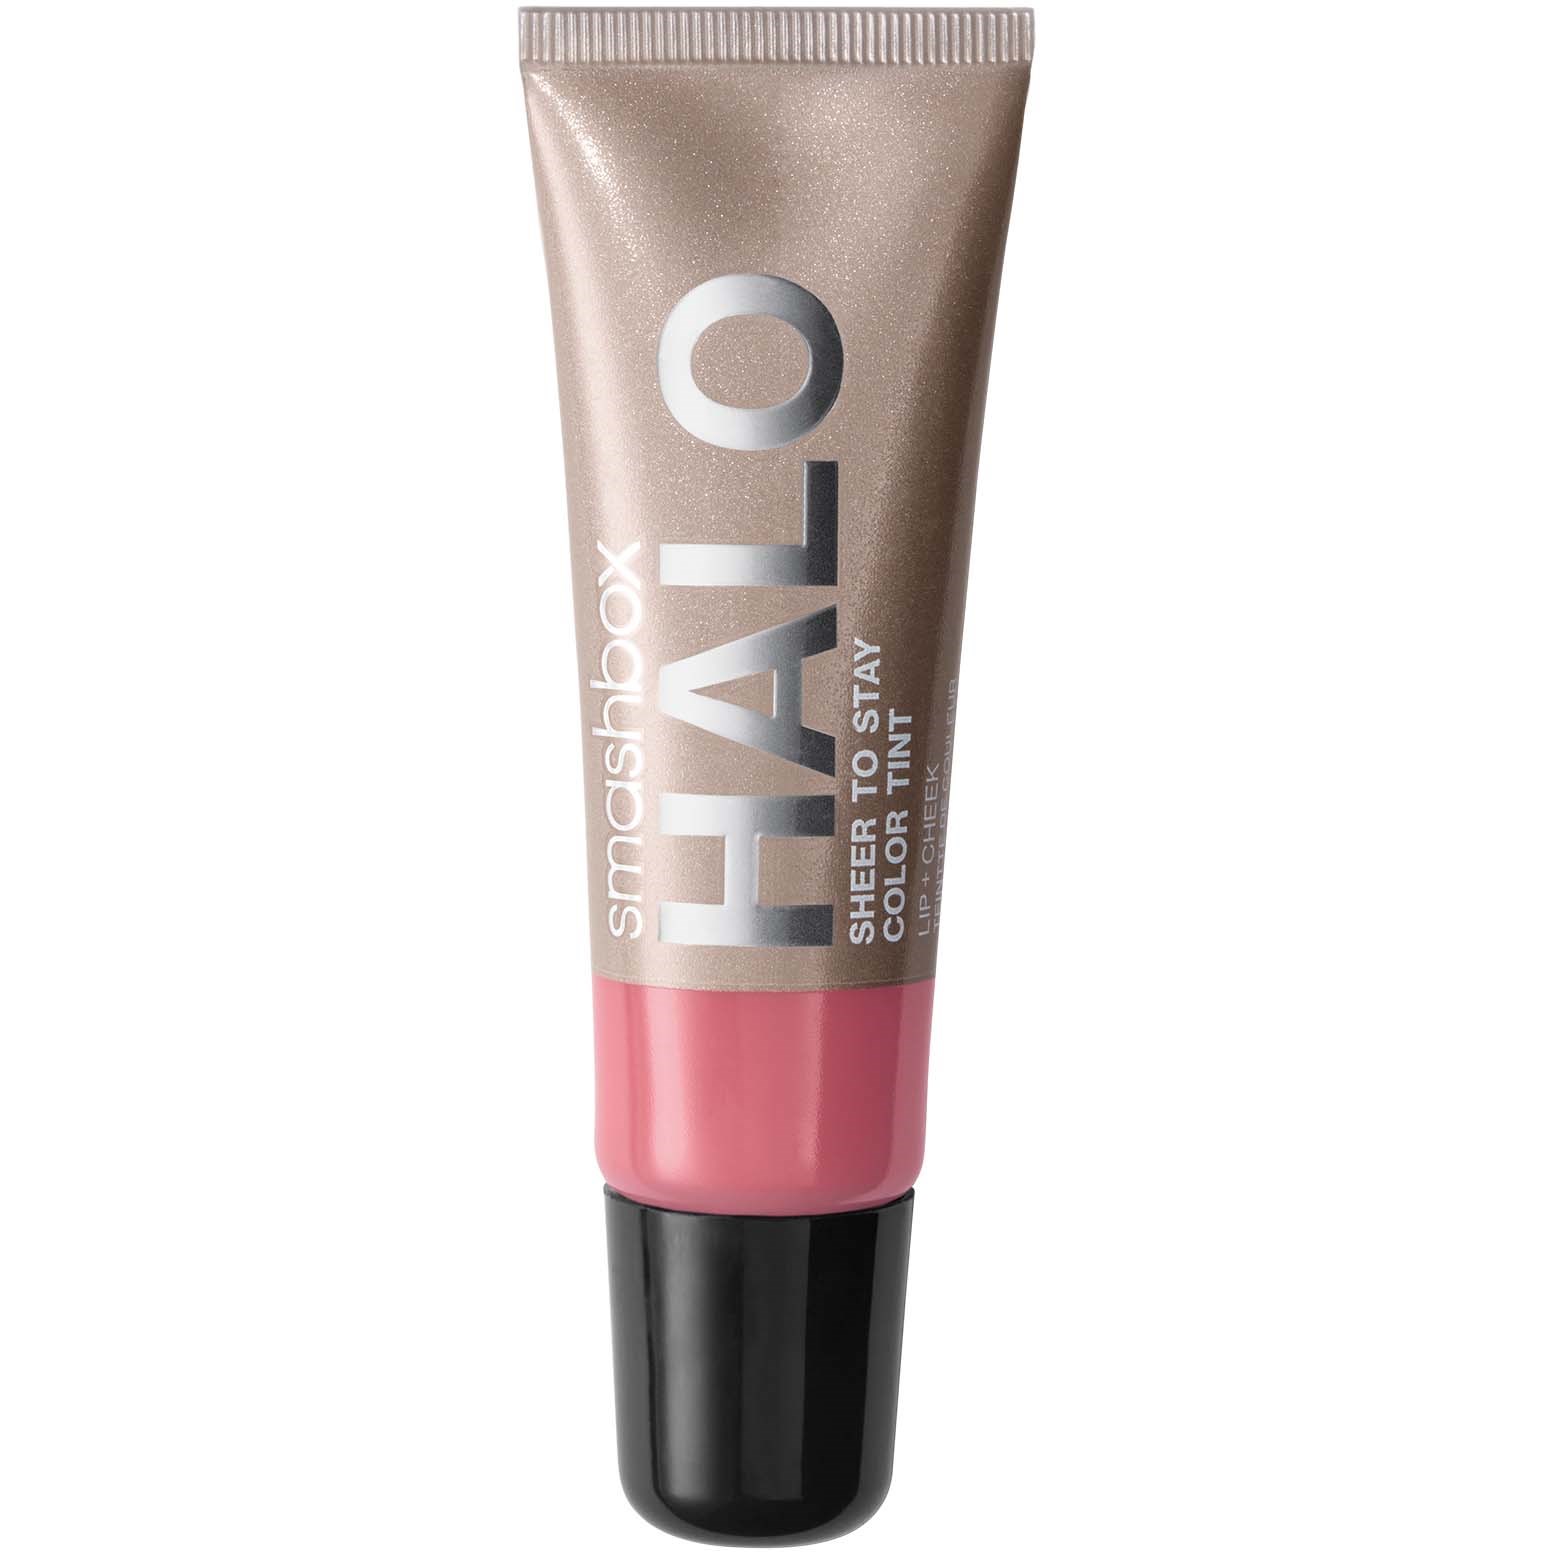 Smashbox Halo Sheer To Stay Color Tint Wisteria